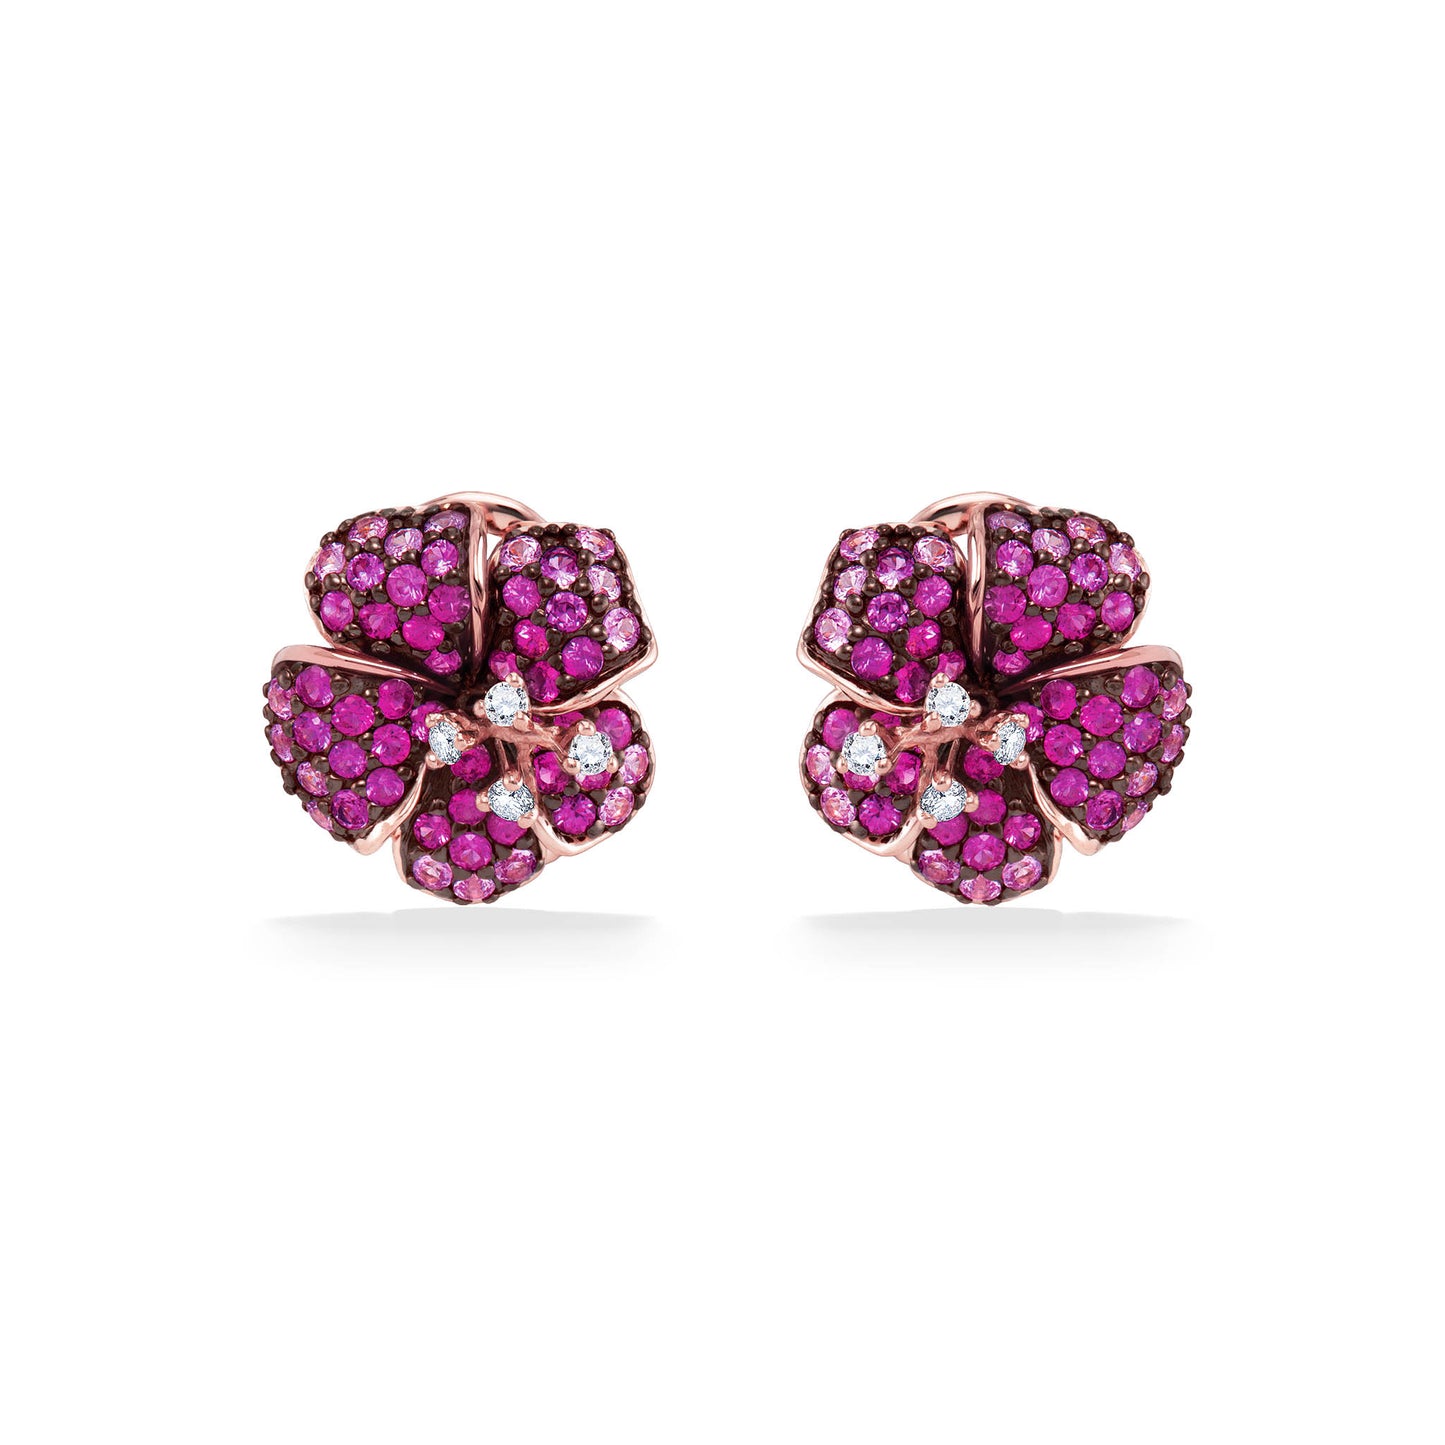 767548 - 14K Rose Gold - Le Vian Aloha Collection Hibiscus Earrings